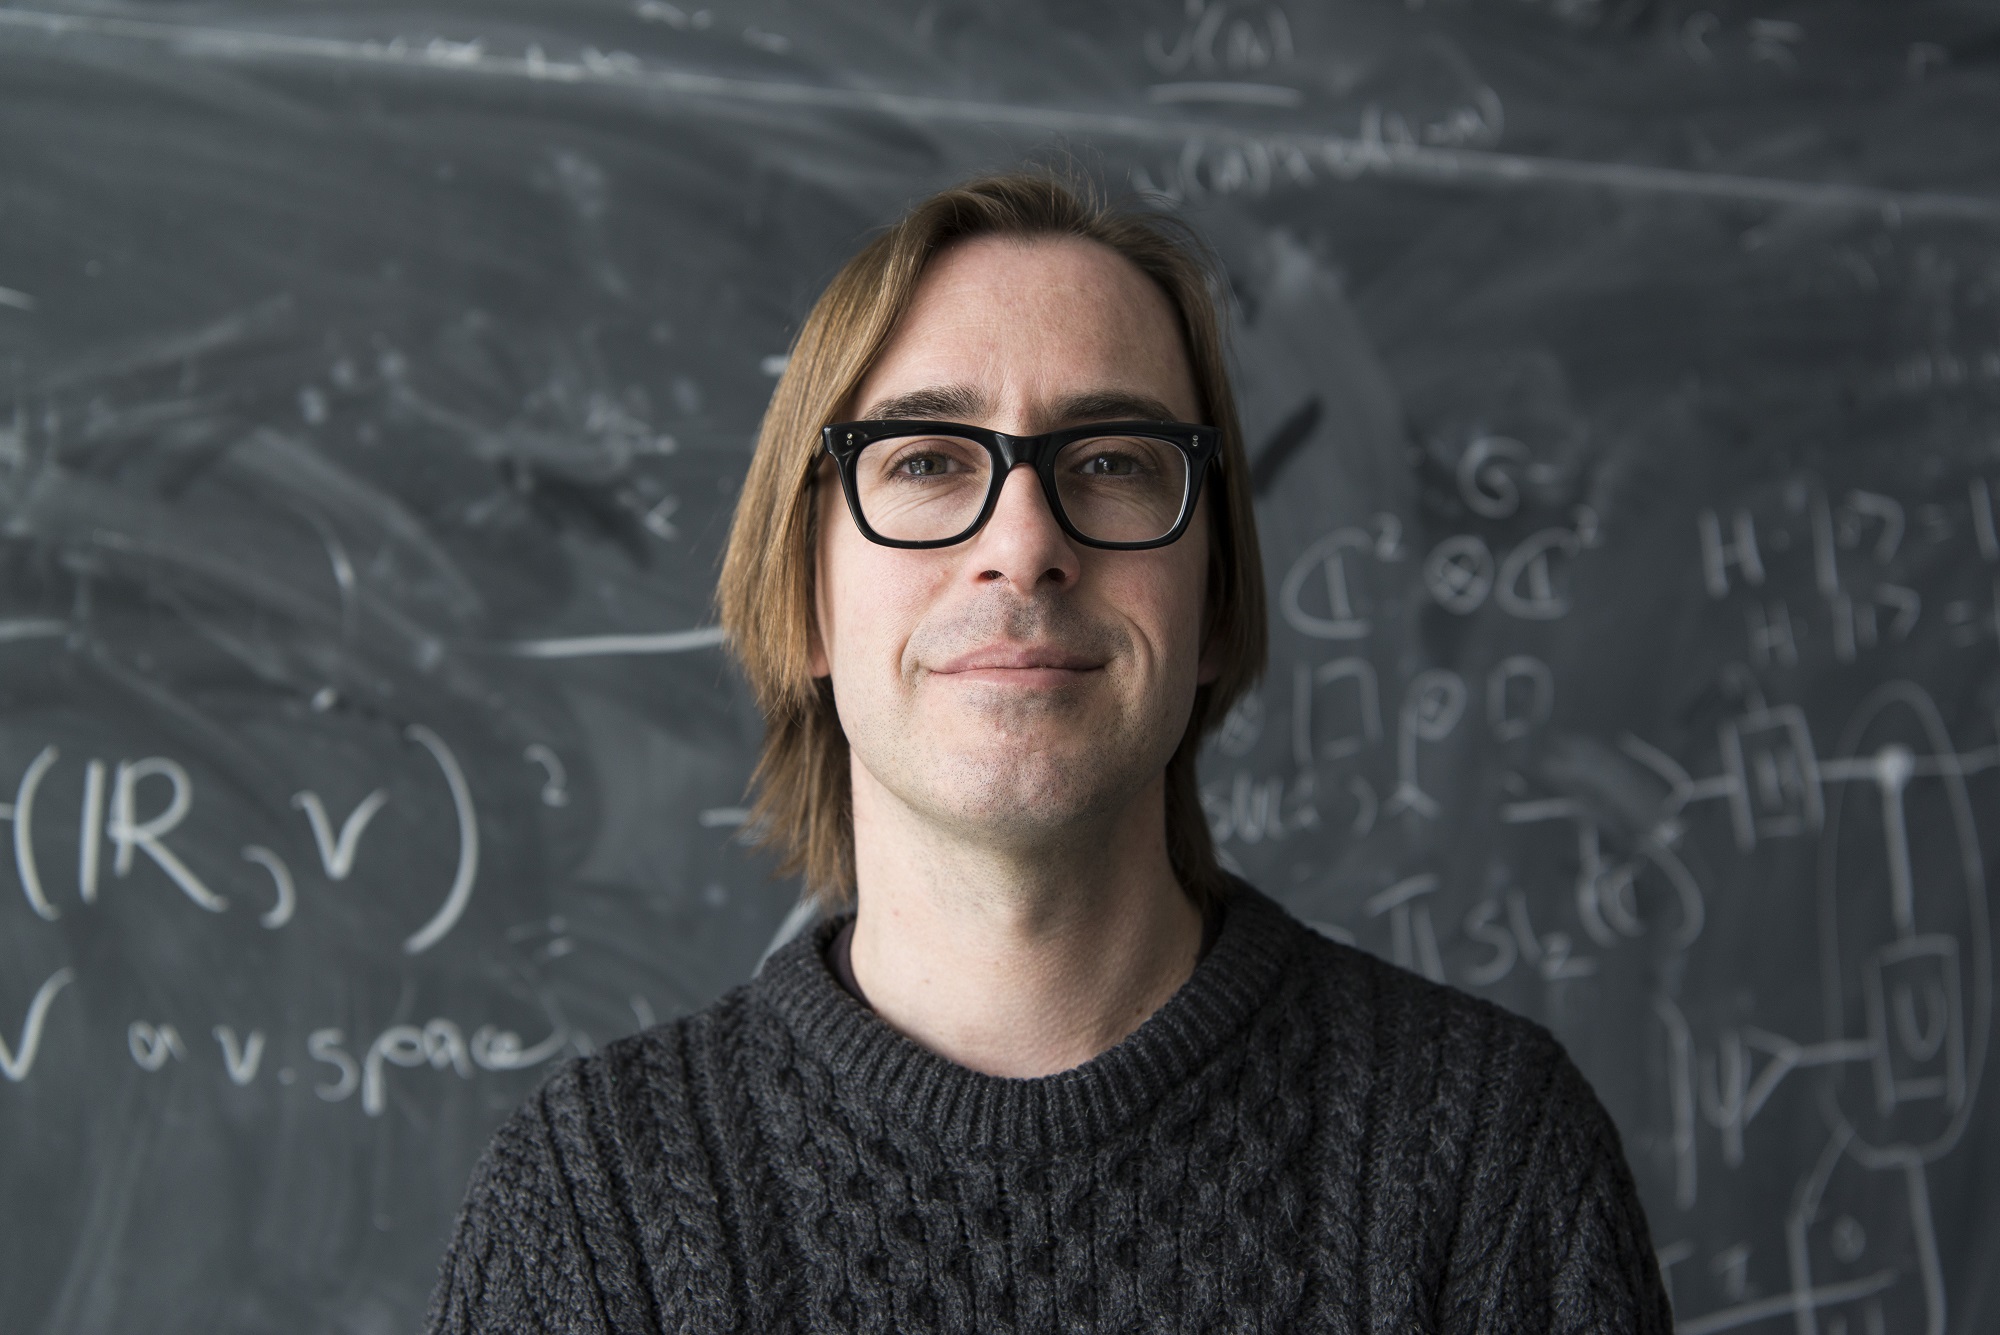 Portrait of Perimeter Faculty member Kevin Costello, winner of the 2020 Leonard Eisenbud Prize for Mathematics and Physics from the American Mathematical Society (AMS)